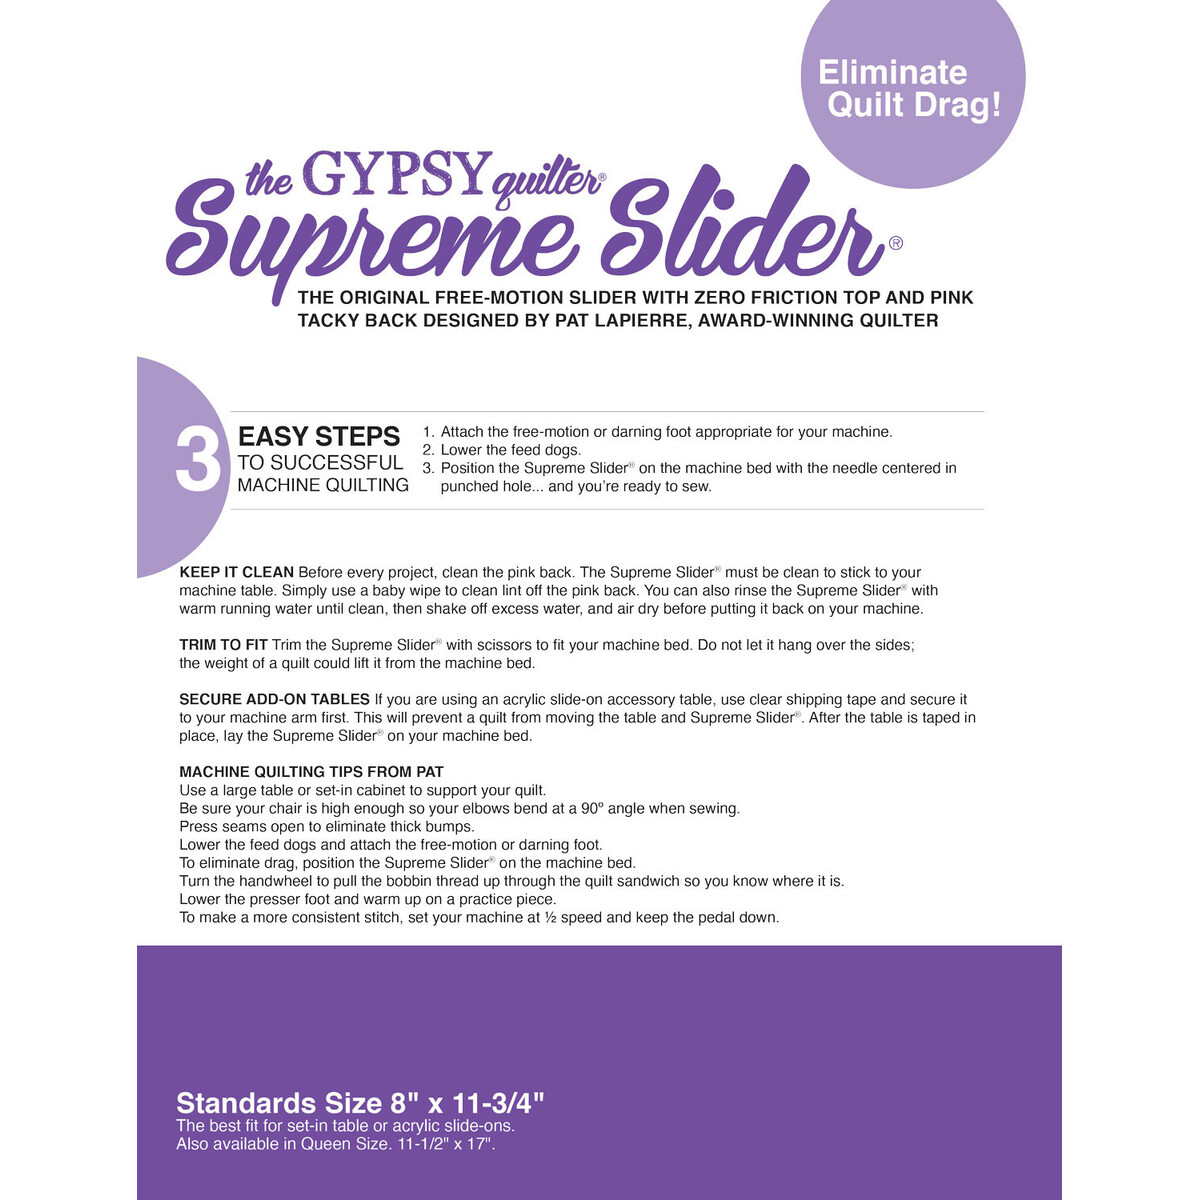 Supreme Slider 8 x 11-3/4 by The Gypsy Quilter